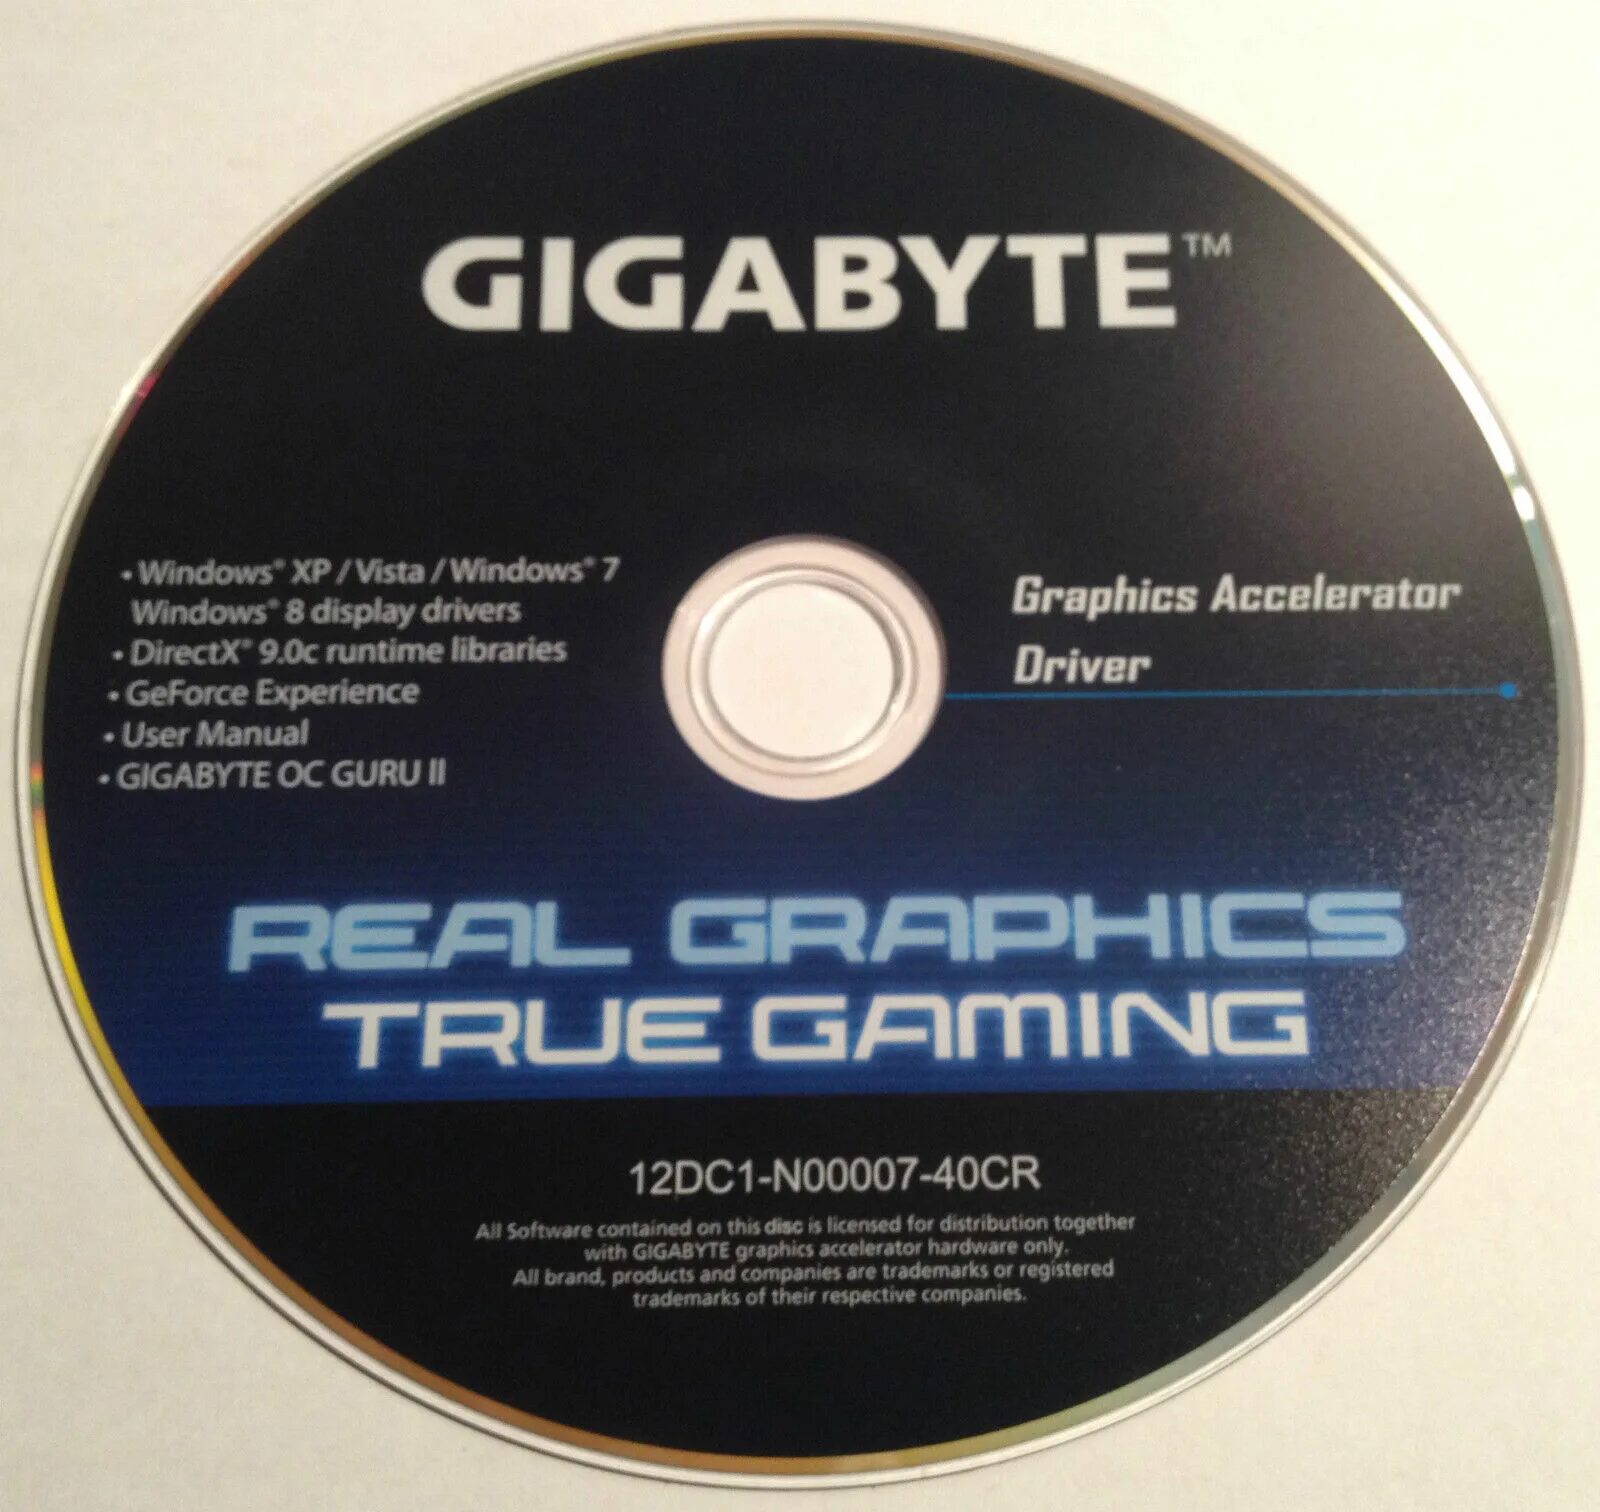 Cds драйвер. Драйвер CD. Drivers диск. VGA Driver Compact Disk диск. Диск Gigabyte real Graphics true Gaming.